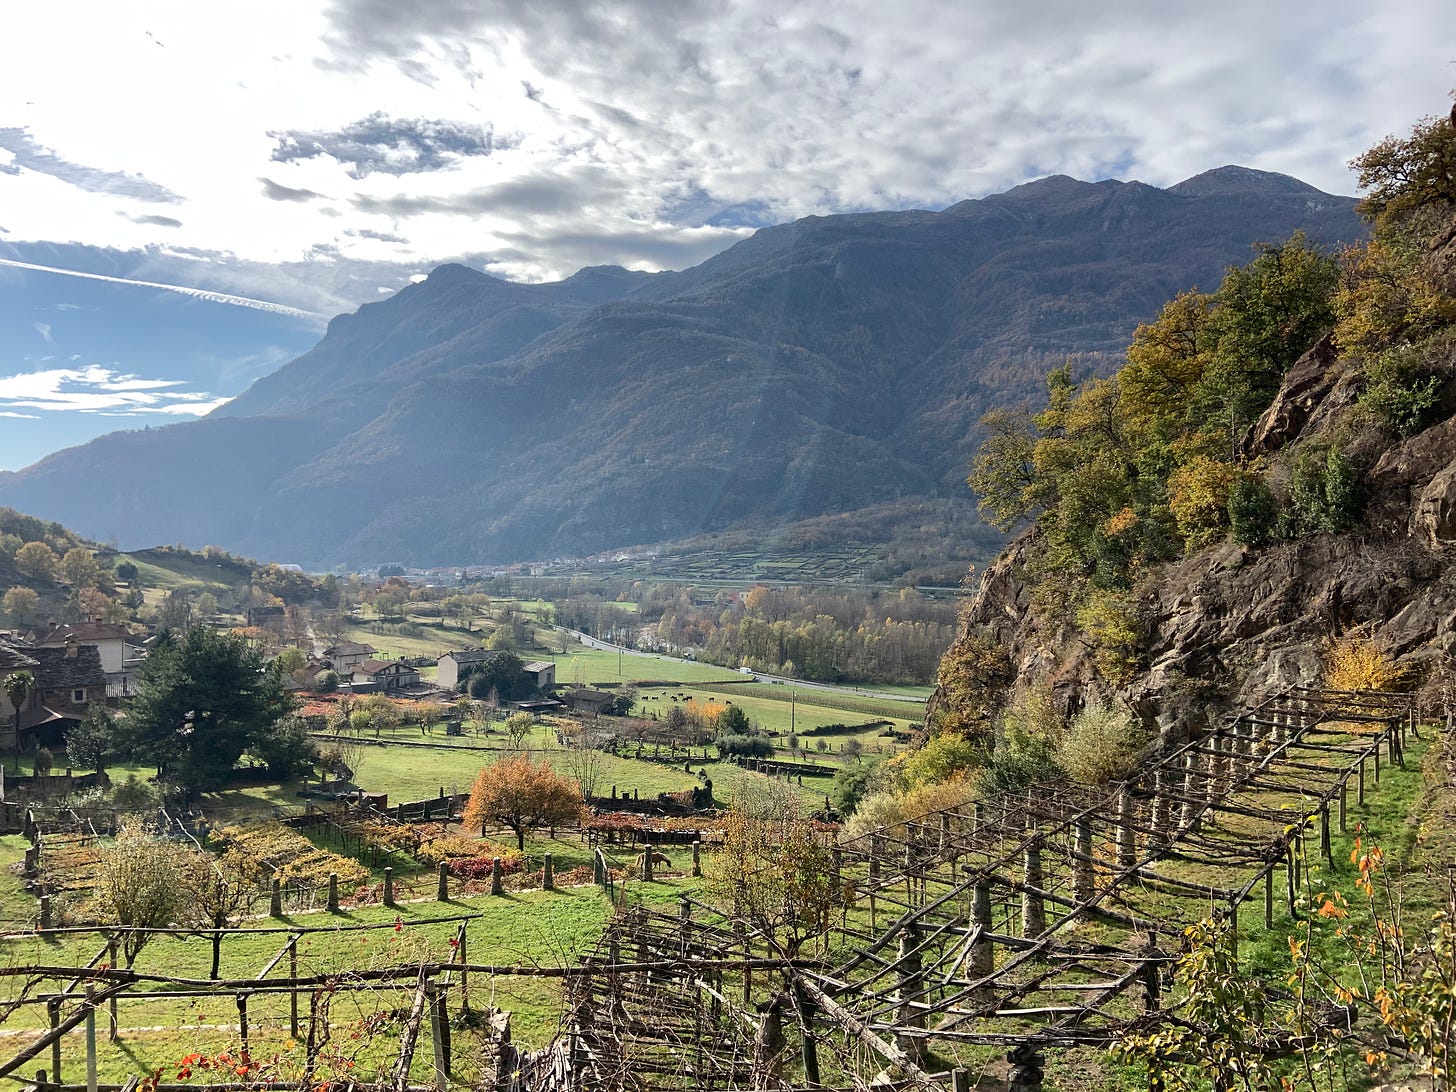 Visiting Italy also means discovering its wines. Thanks to the climatic conditions that allow the growth of vines and a particular richness and variety of soils, Italy boasts a great wealth of wines.